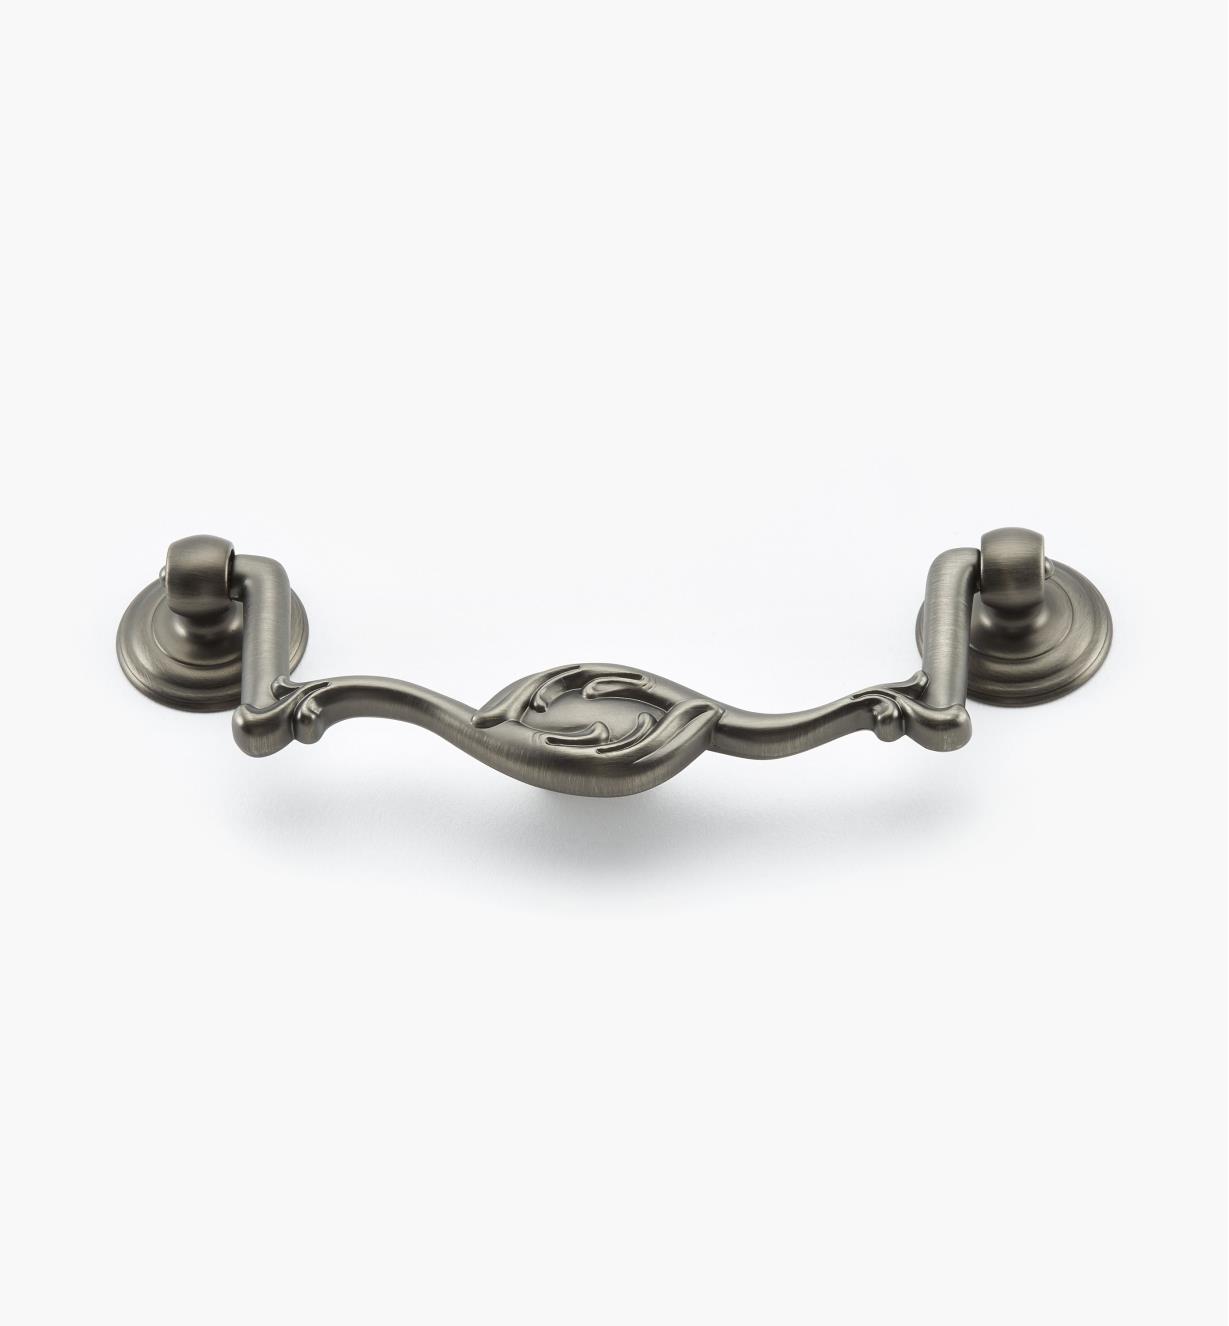 02A5263 - 4 7/8" Antique Nickel Bail Pull